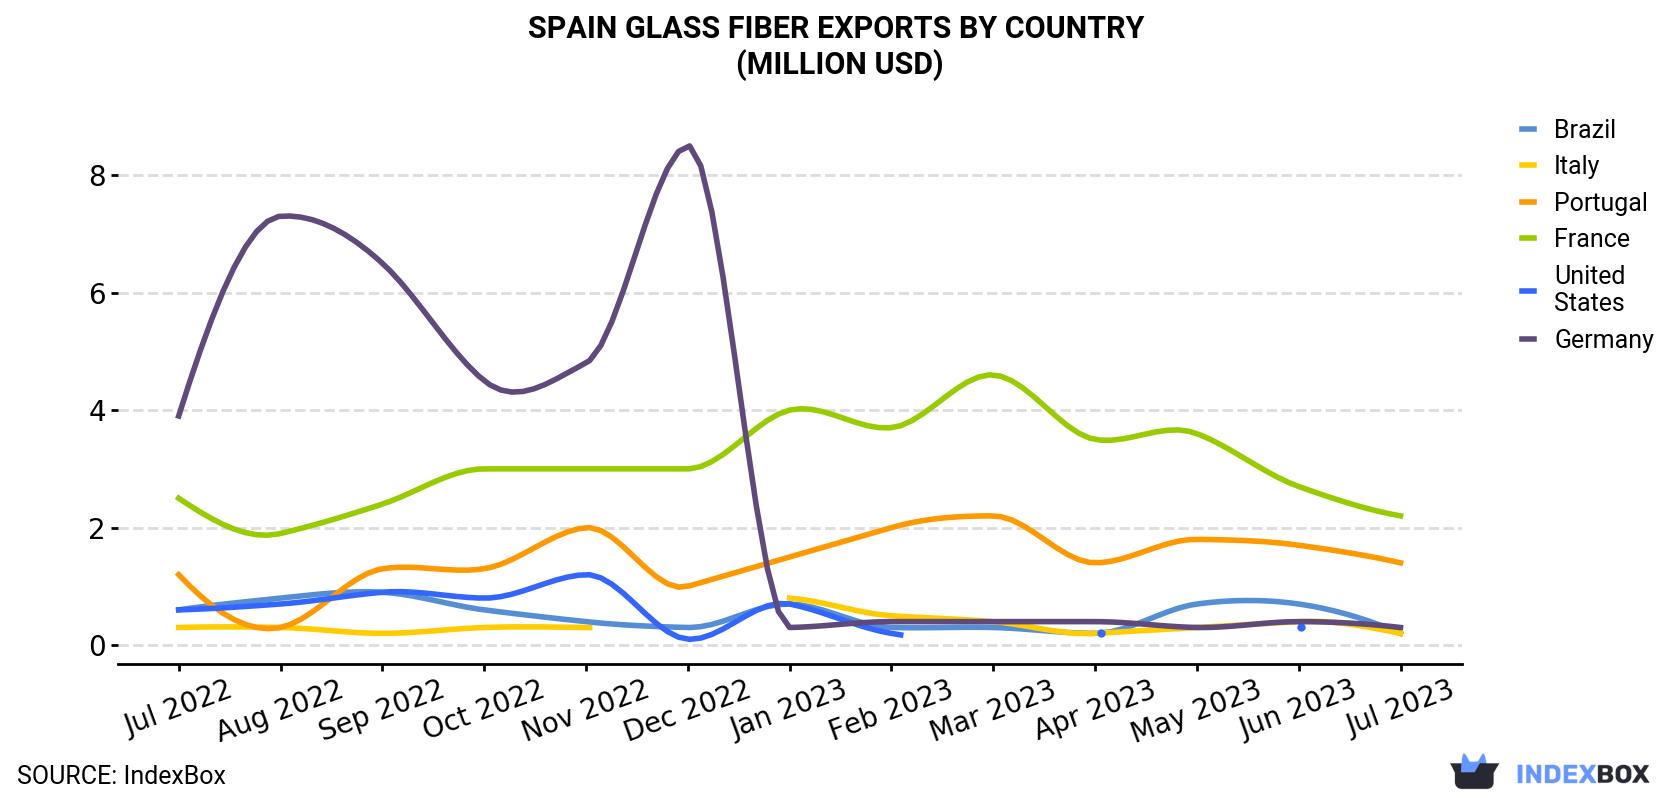 Spain Glass Fiber Exports By Country (Million USD)